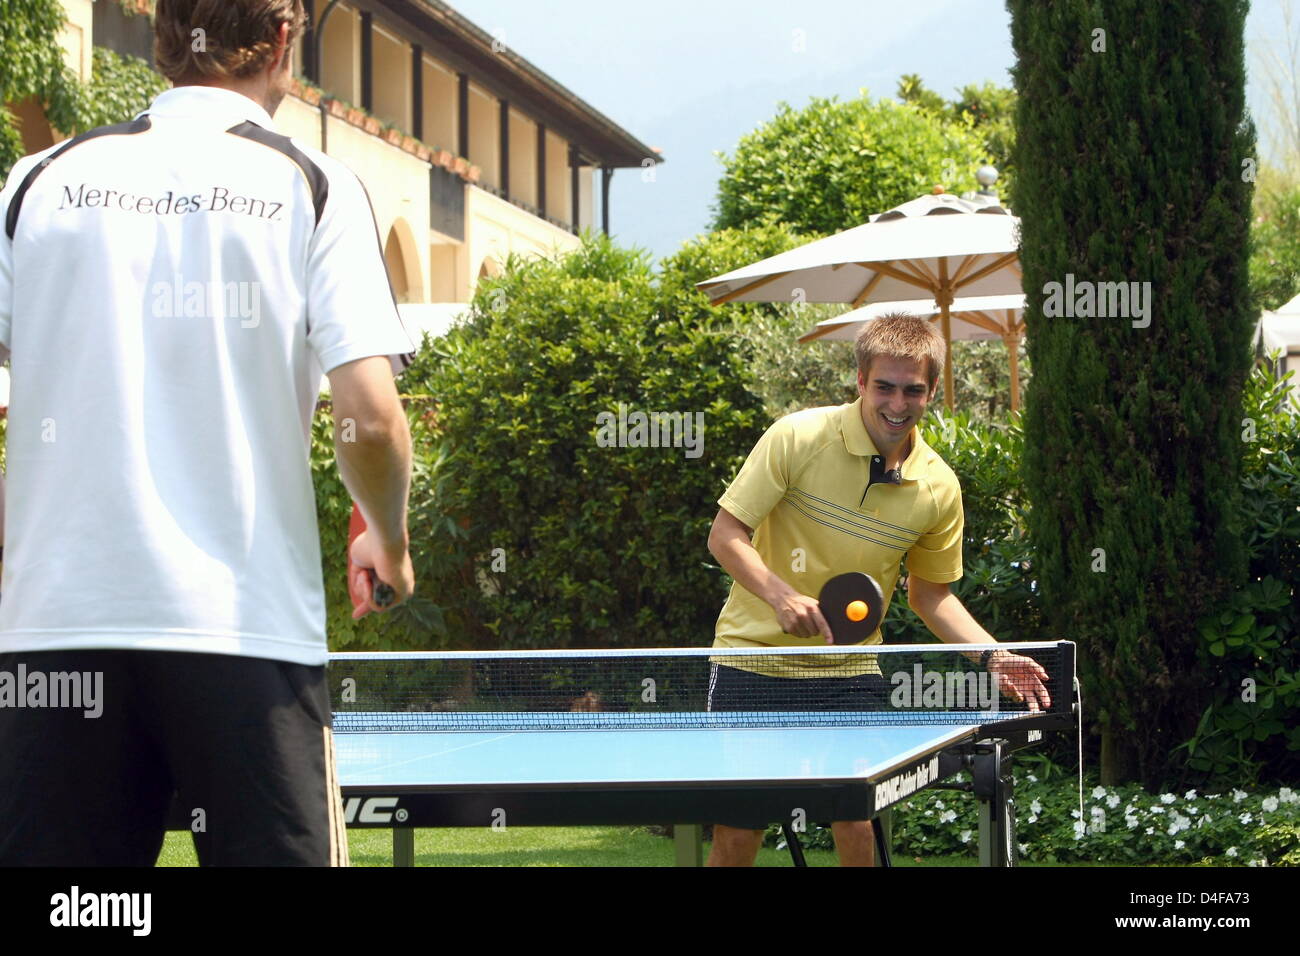 Photo, made available on 22 June 2008, shows German national soccer players Arne Friedrich (L) and Philipp Lahm playing table tennis at the teams' hotel 'Il Giardino' in Ascona, Switzerland, 21 June 2008. Photo: Alexander Hassenstein +++(c) dpa - Bildfunk+++ Stock Photo